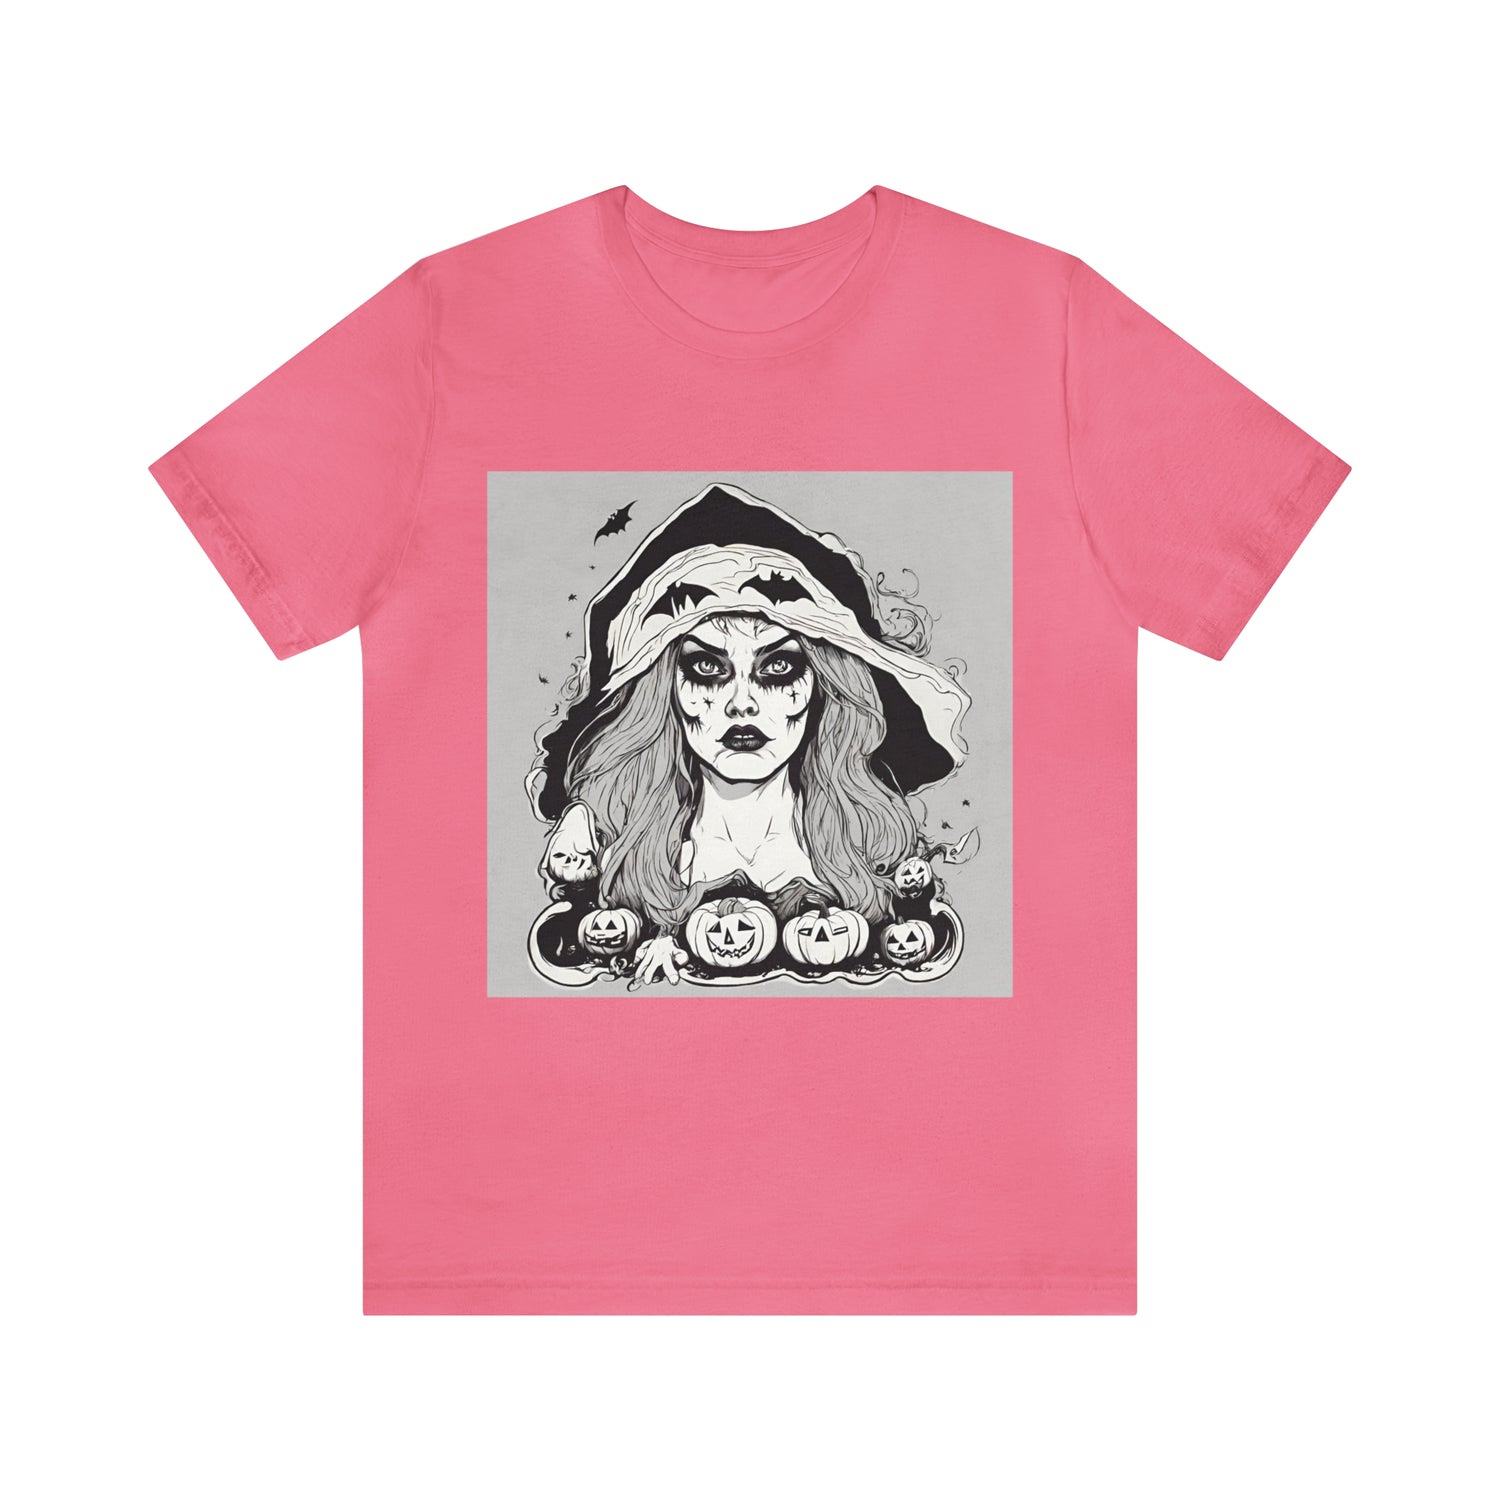 Charity Pink T-Shirt Tshirt Design Halloween Gift for Friend and Family Short Sleeved Shirt Petrova Designs